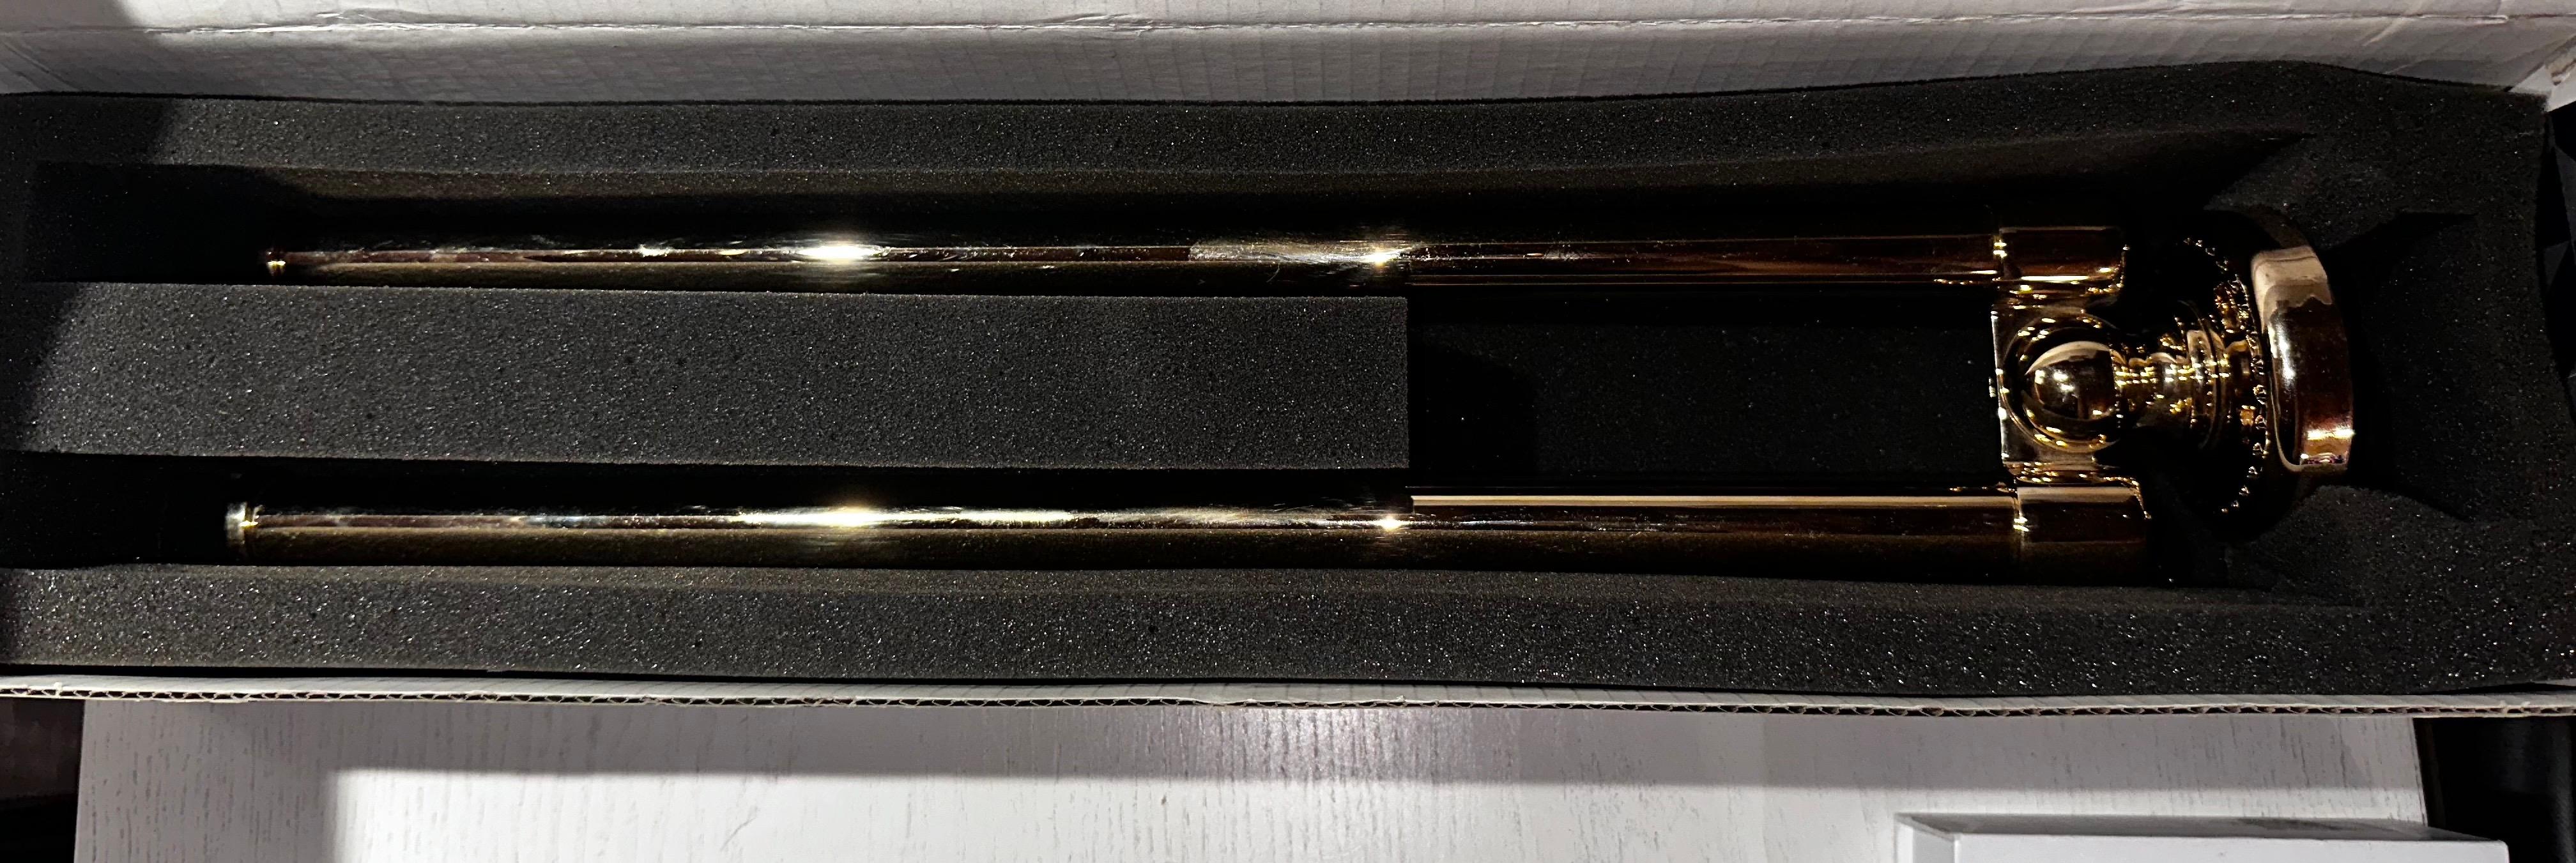 Dornbracht Princesse Collection 2-Tier Swivel Towel Bar, Gold-plated, Germany. Rare. Open box, never installed from iconic 1970-80s Princesse collection (see last photos for faucets from collection). 